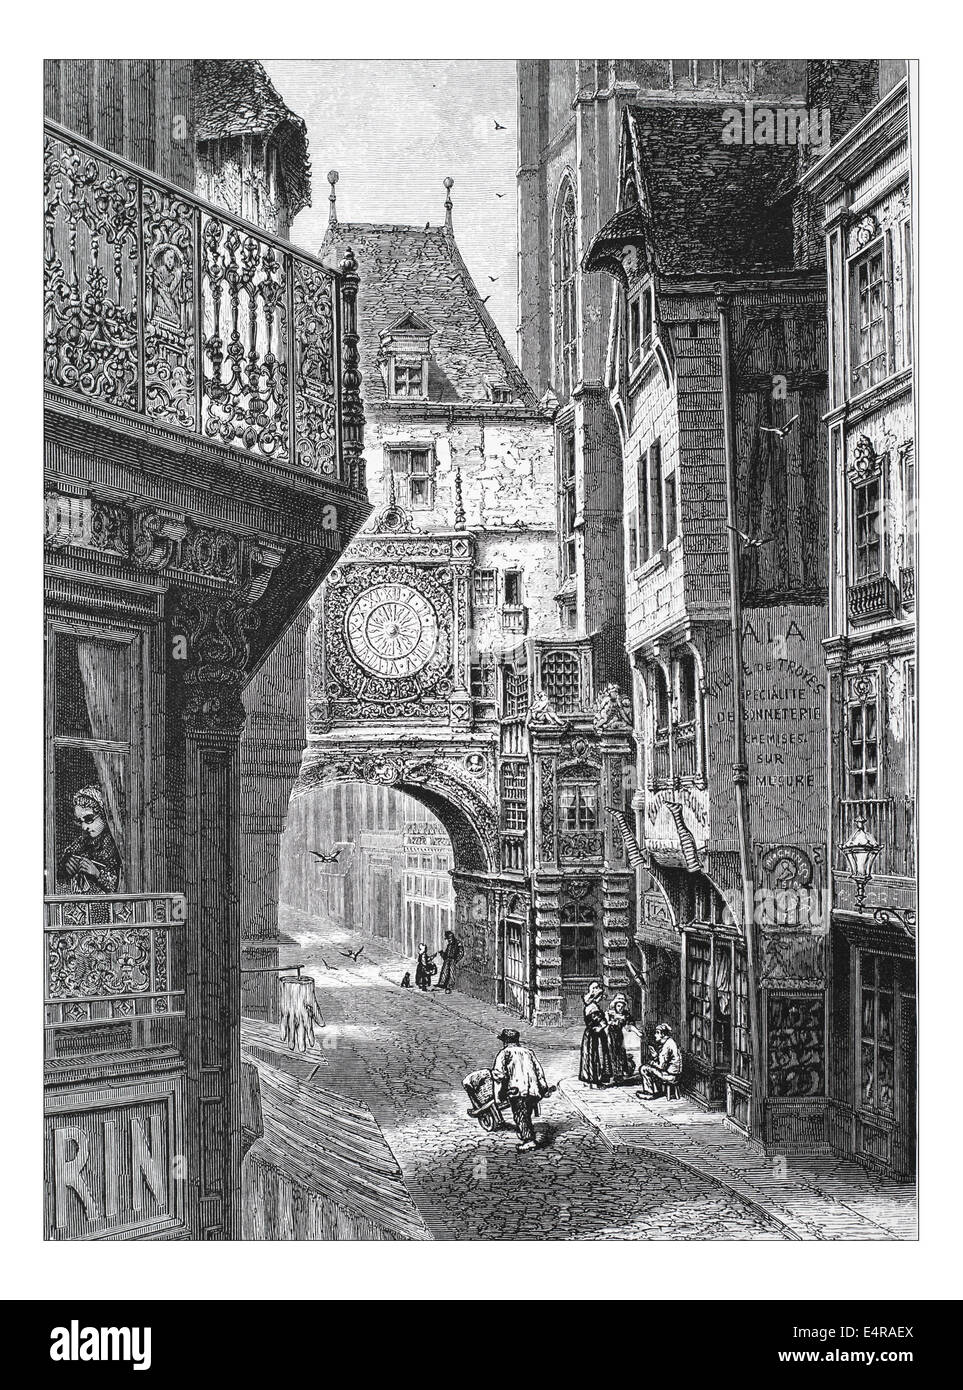 La Grosse Horloge, Rouen Illustration from 'The British isles - Cassell Petter & Galpin Part 8 Picturesque Europe. Picturesque Europe was an illustrated set of Magazines published by Cassell, Petter, Galpin & Co. of London, Paris and New York in 1877. The publications depicted tourist haunts in Europe, with text descriptions and steel and wood engravings by eminent artists of the time, such as Harry Fenn, William H J Boot, Thomas C. L. Rowbotham, Henry T. Green , Myles B. Foster, John Mogford , David H. McKewan, William L. Leitch, Edmund M. Wimperis and Joseph B. Smith. Stock Photo